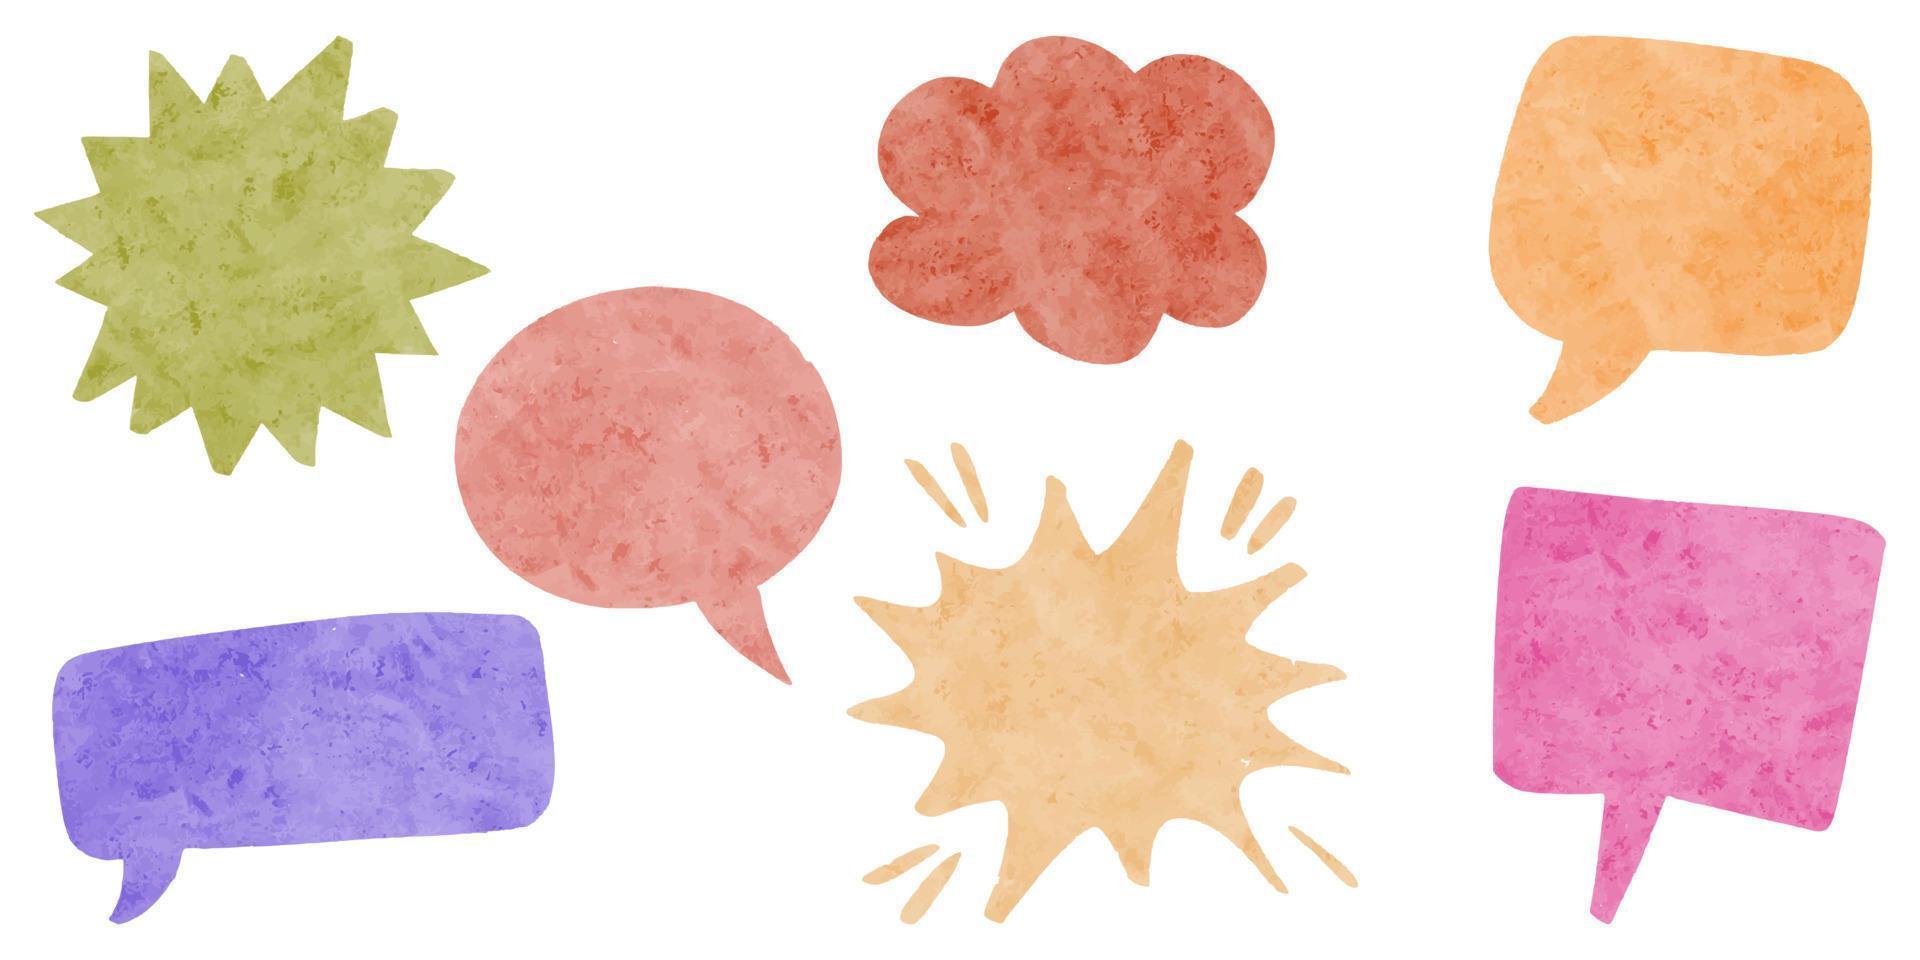 Watercolor hand drawn speech bubbles isolate on white background. vector illustration.